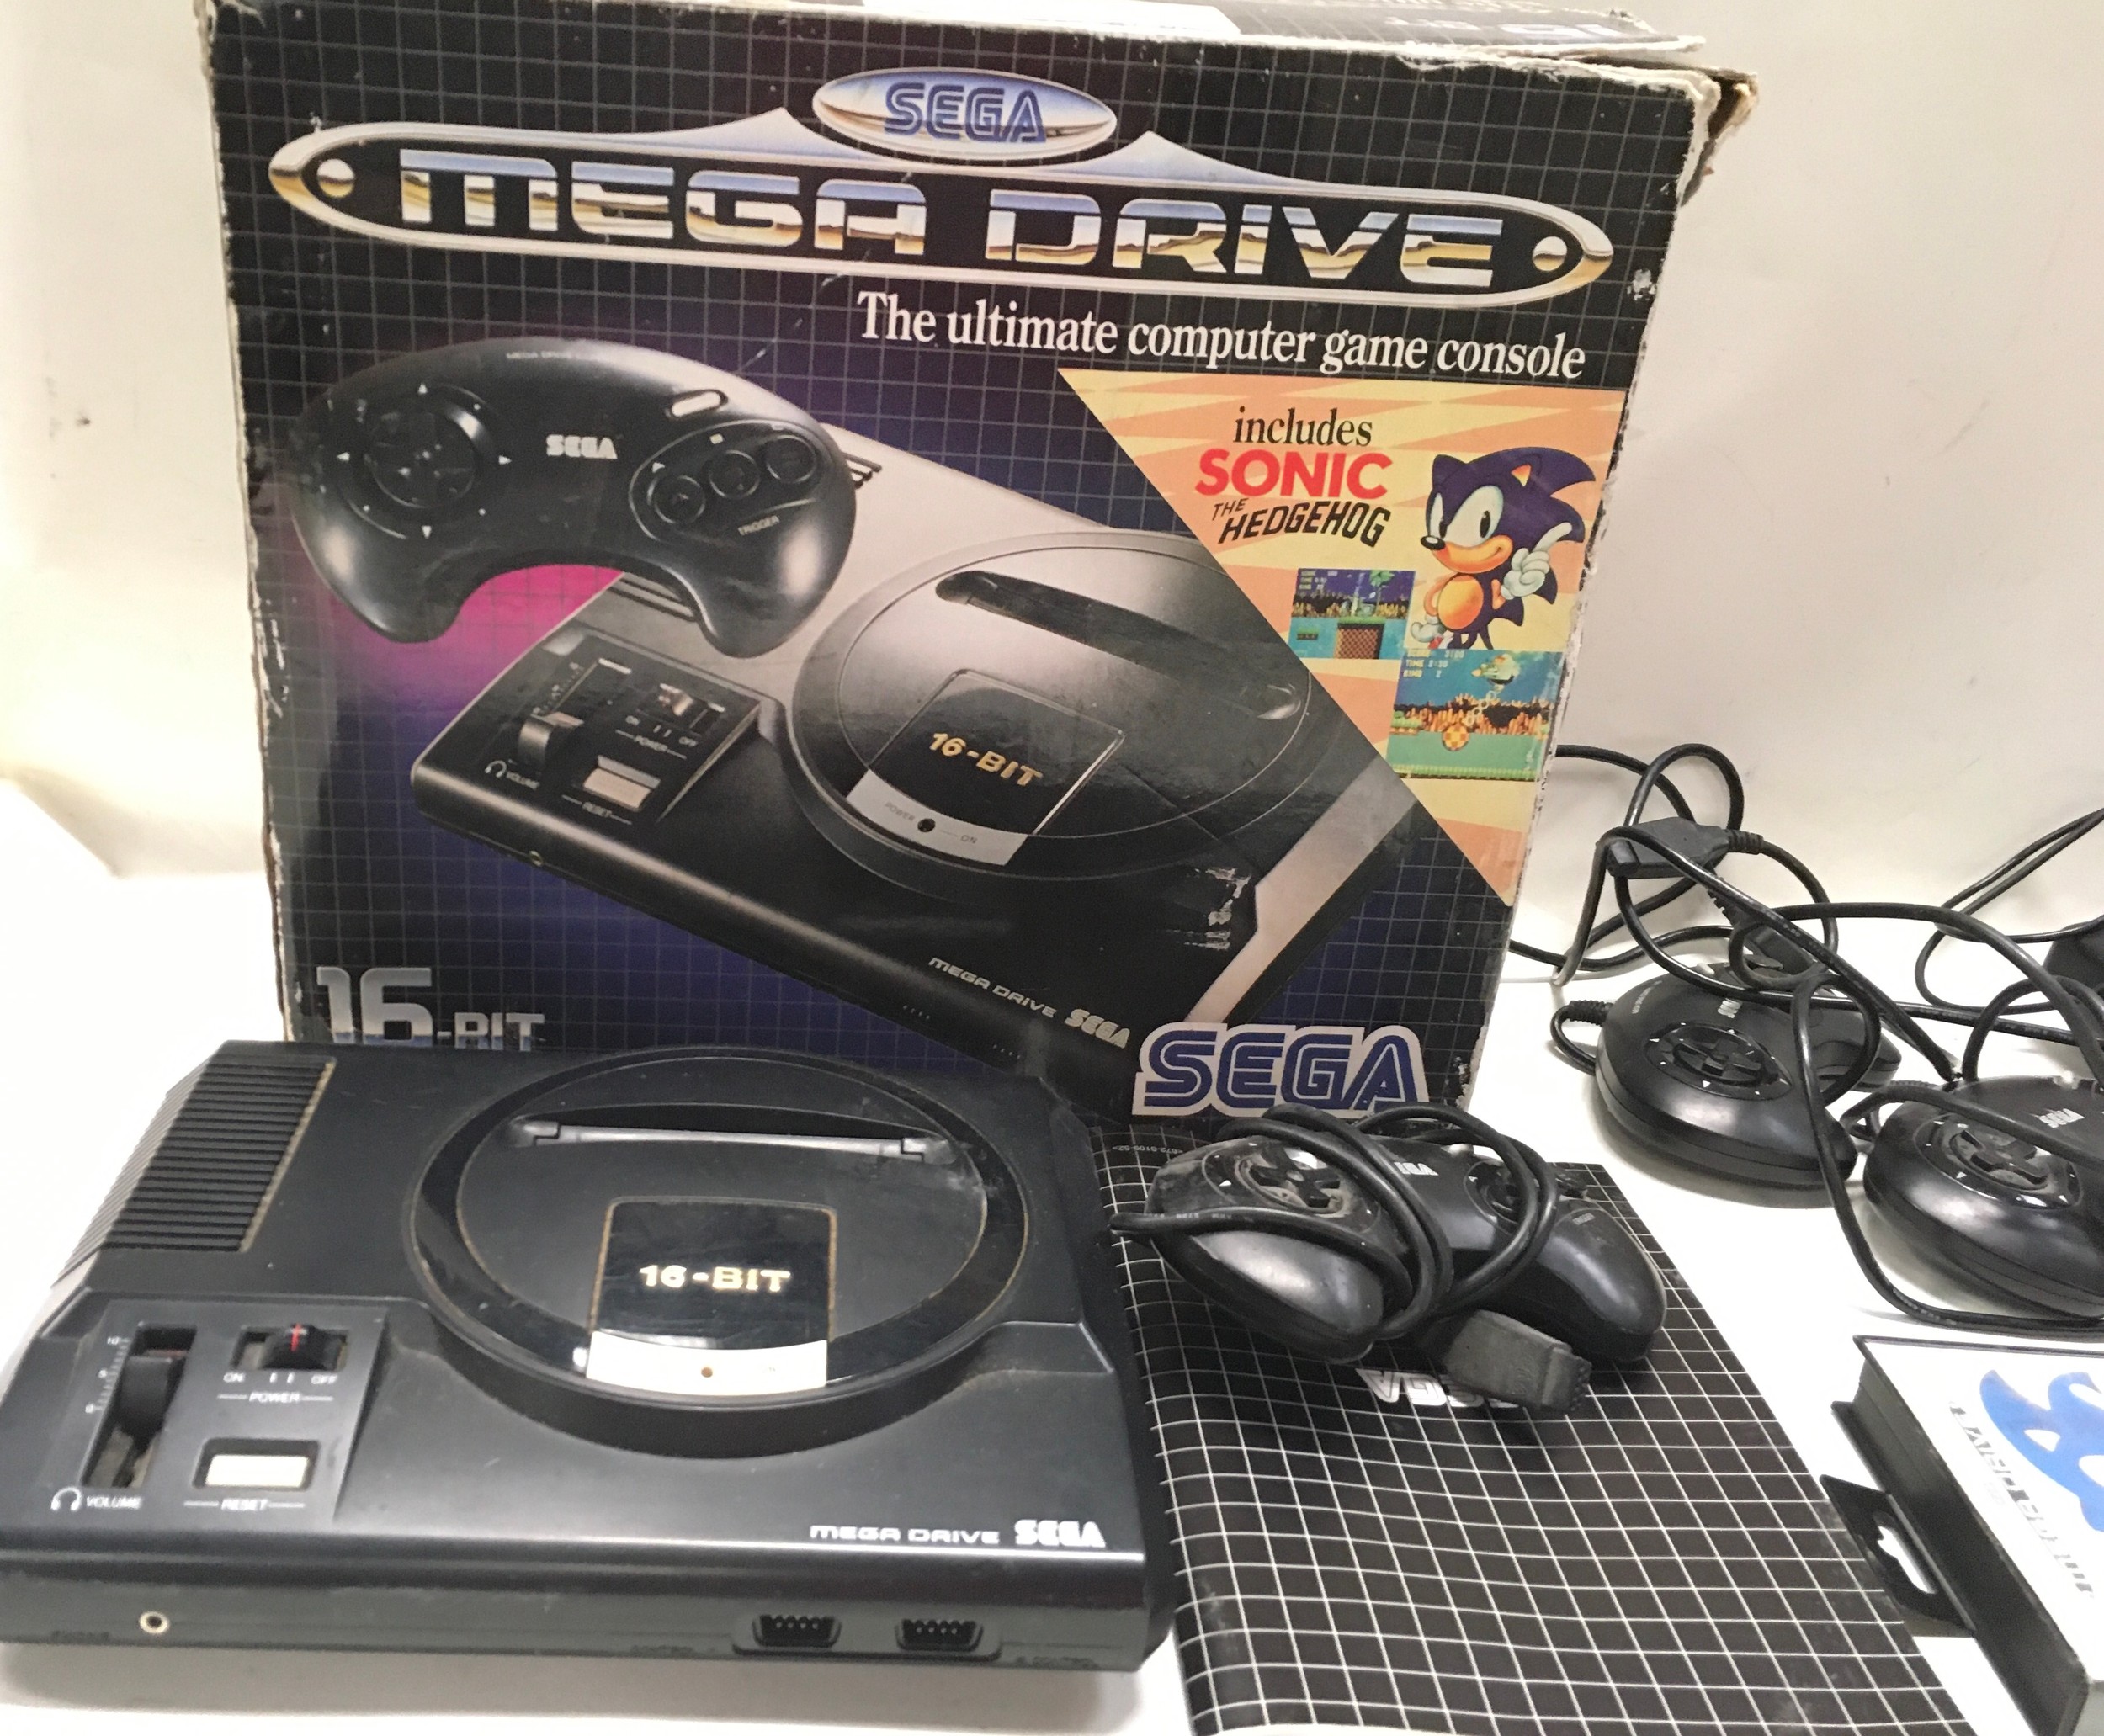 Collection of Sega Mega Drive machines along with controllers and a couple of games. - Image 3 of 3